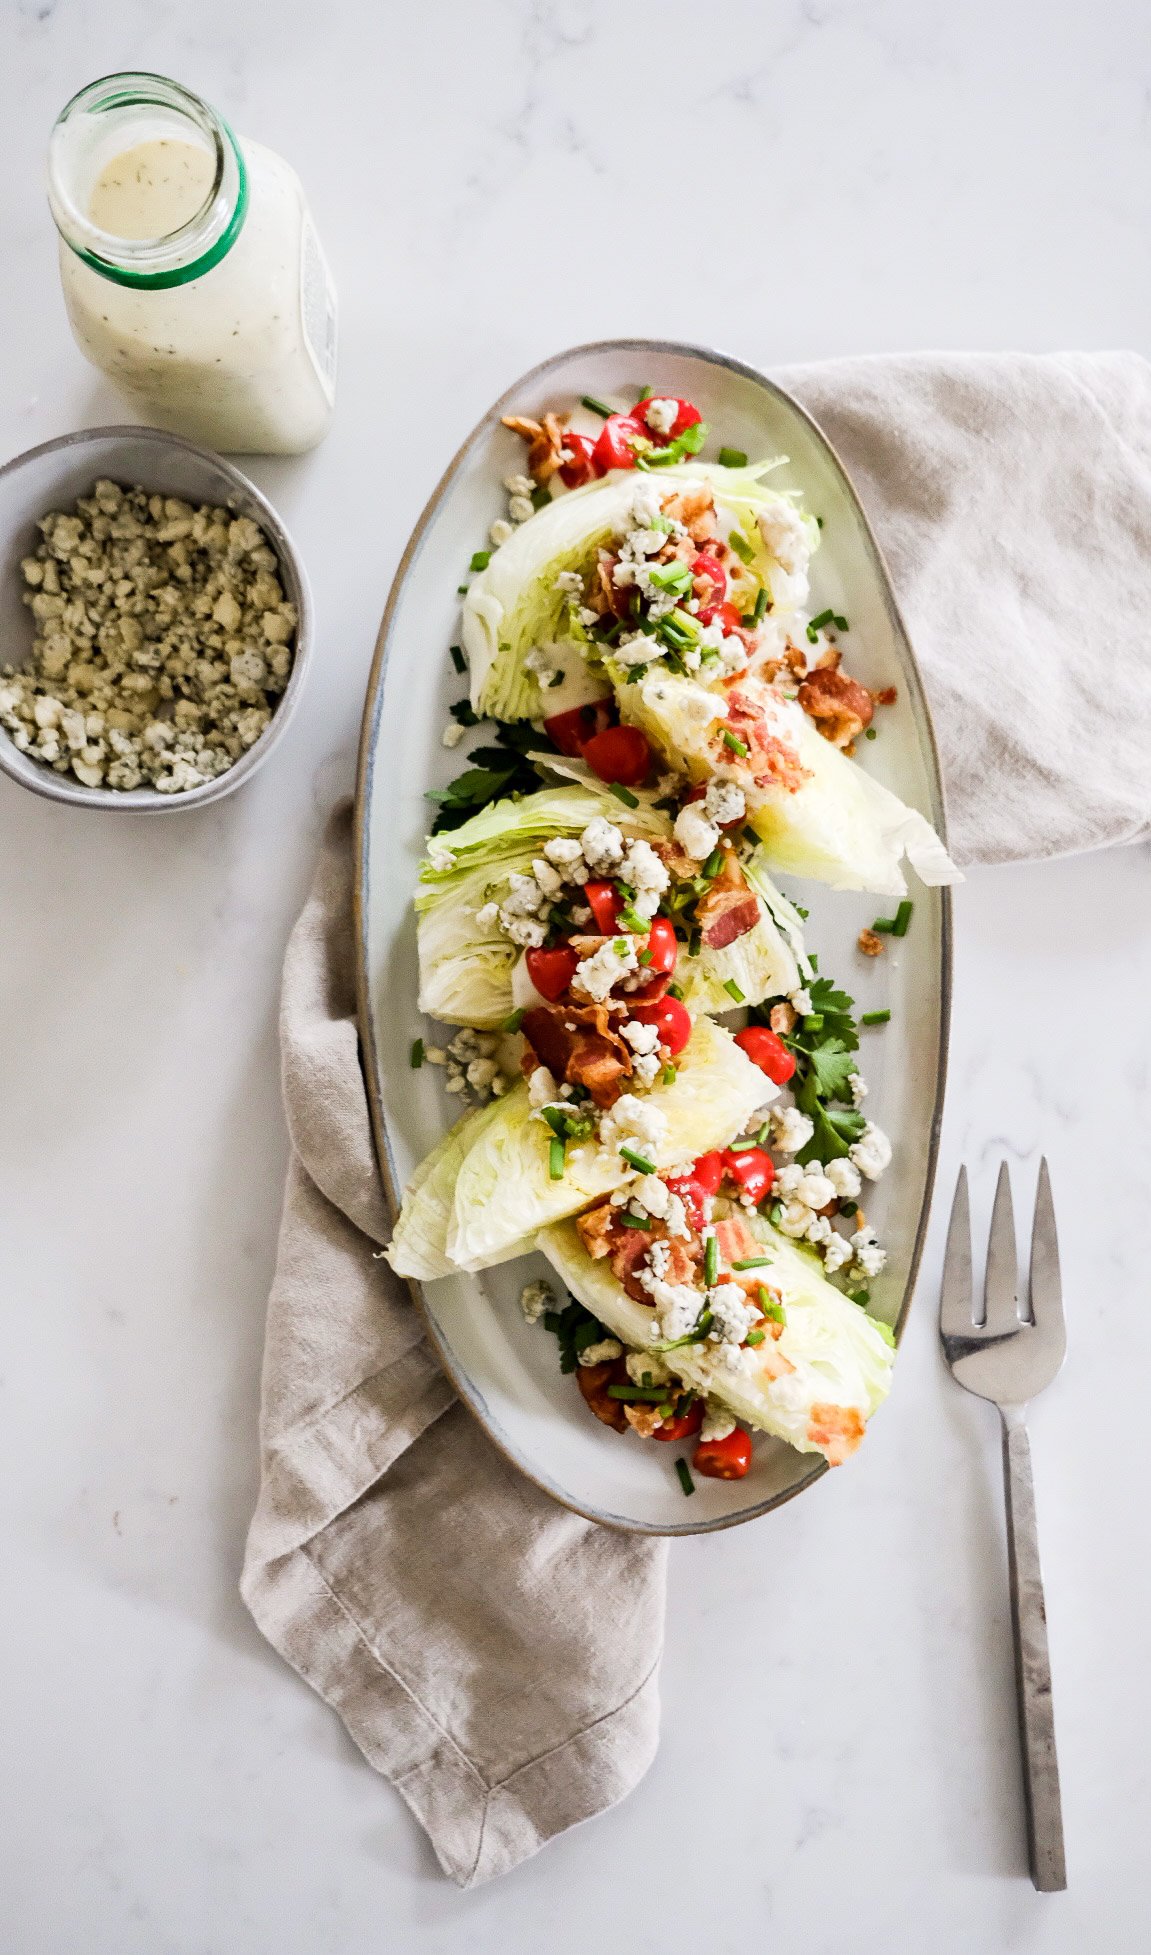 Classic Wedge Salad with Ranch Dressing